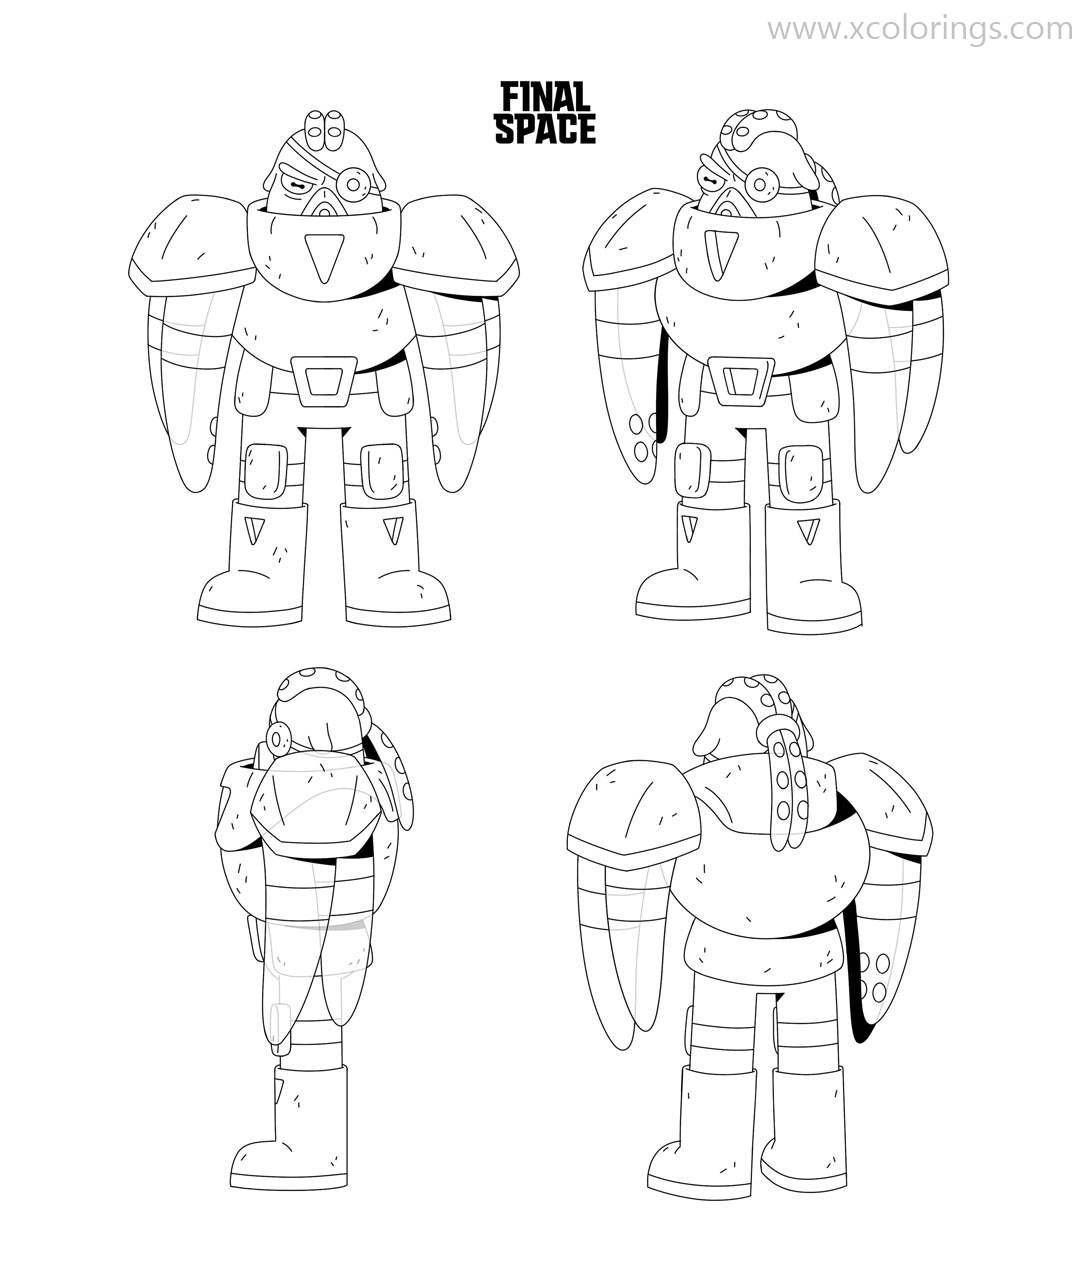 Free Final Space Coloring Pages Alex Horan printable